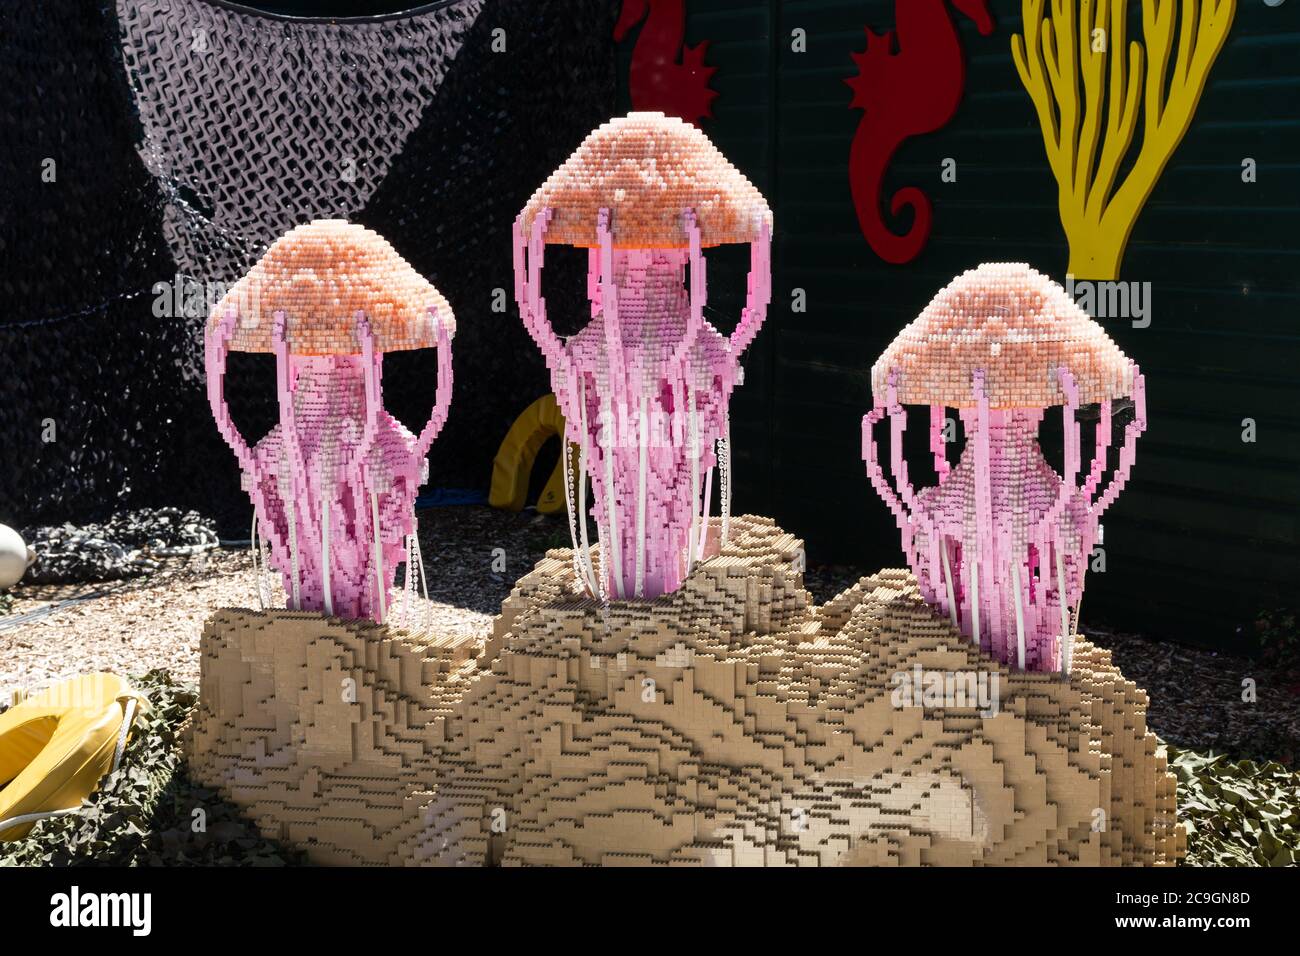 Supersized lego brick animal models at Marwell Zoo, UK, a childrens activity trail. A jellyfish model Stock Photo